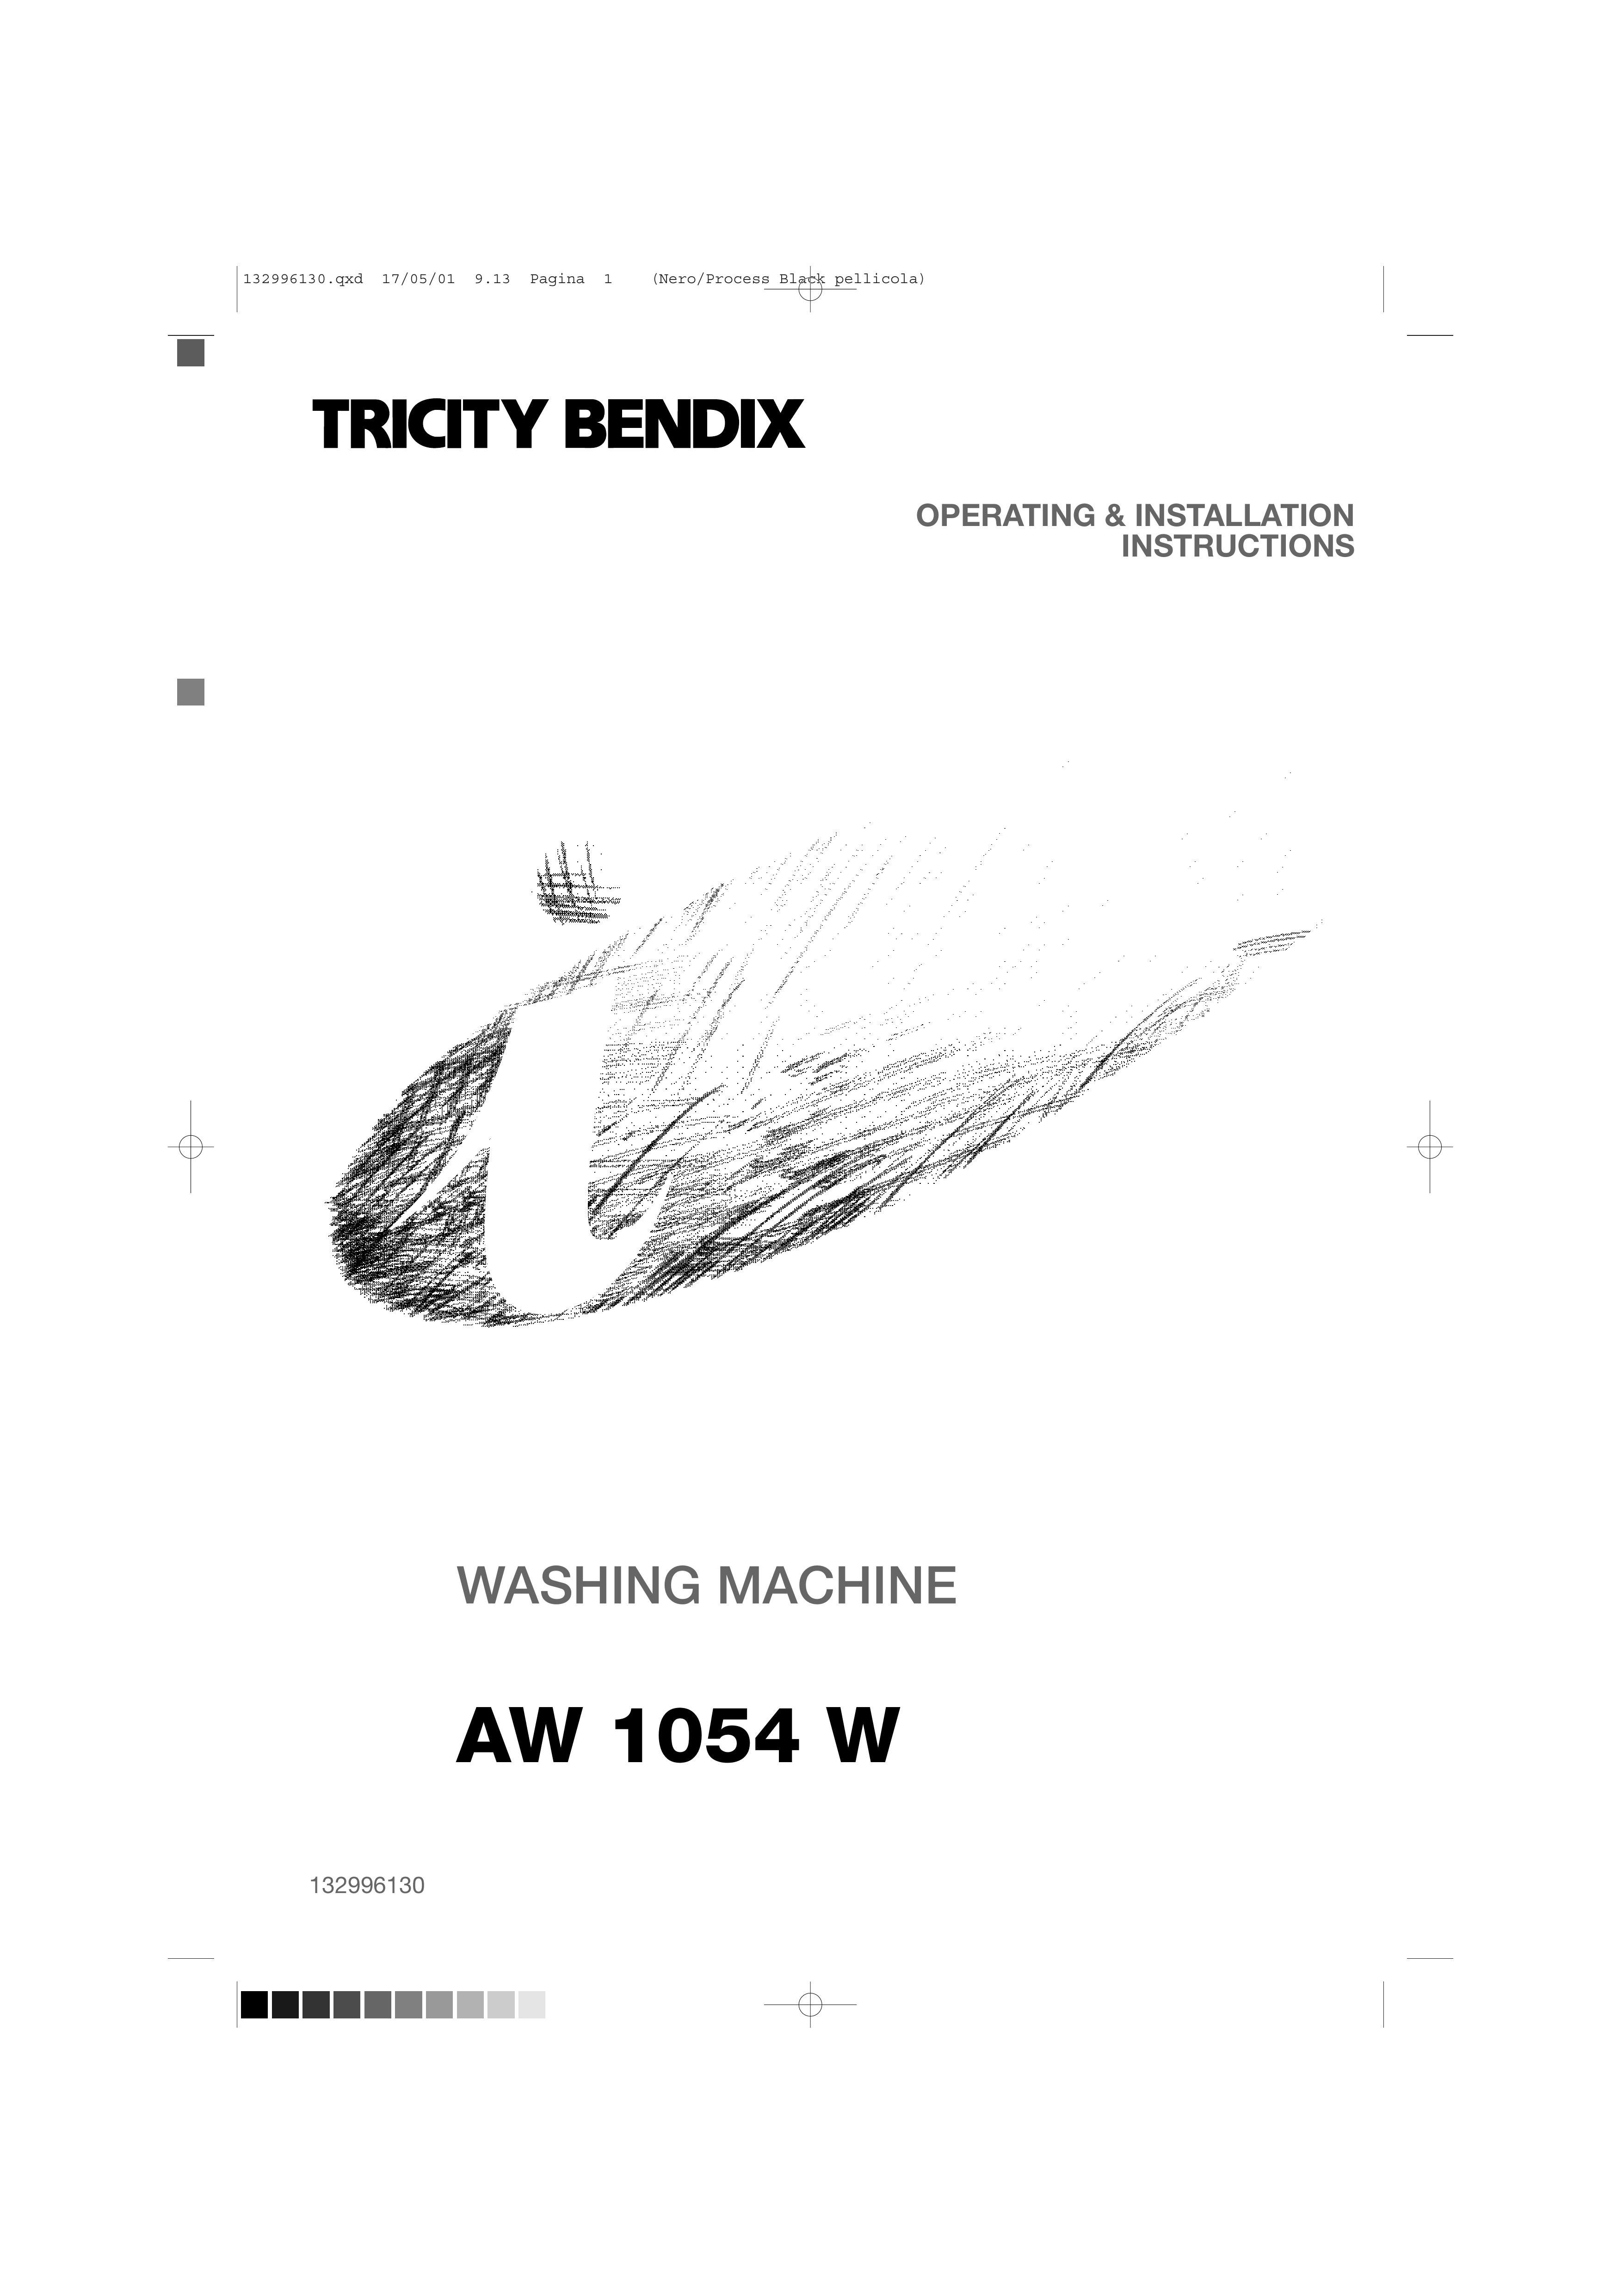 Tricity Bendix AW 1054 W Washer/Dryer User Manual